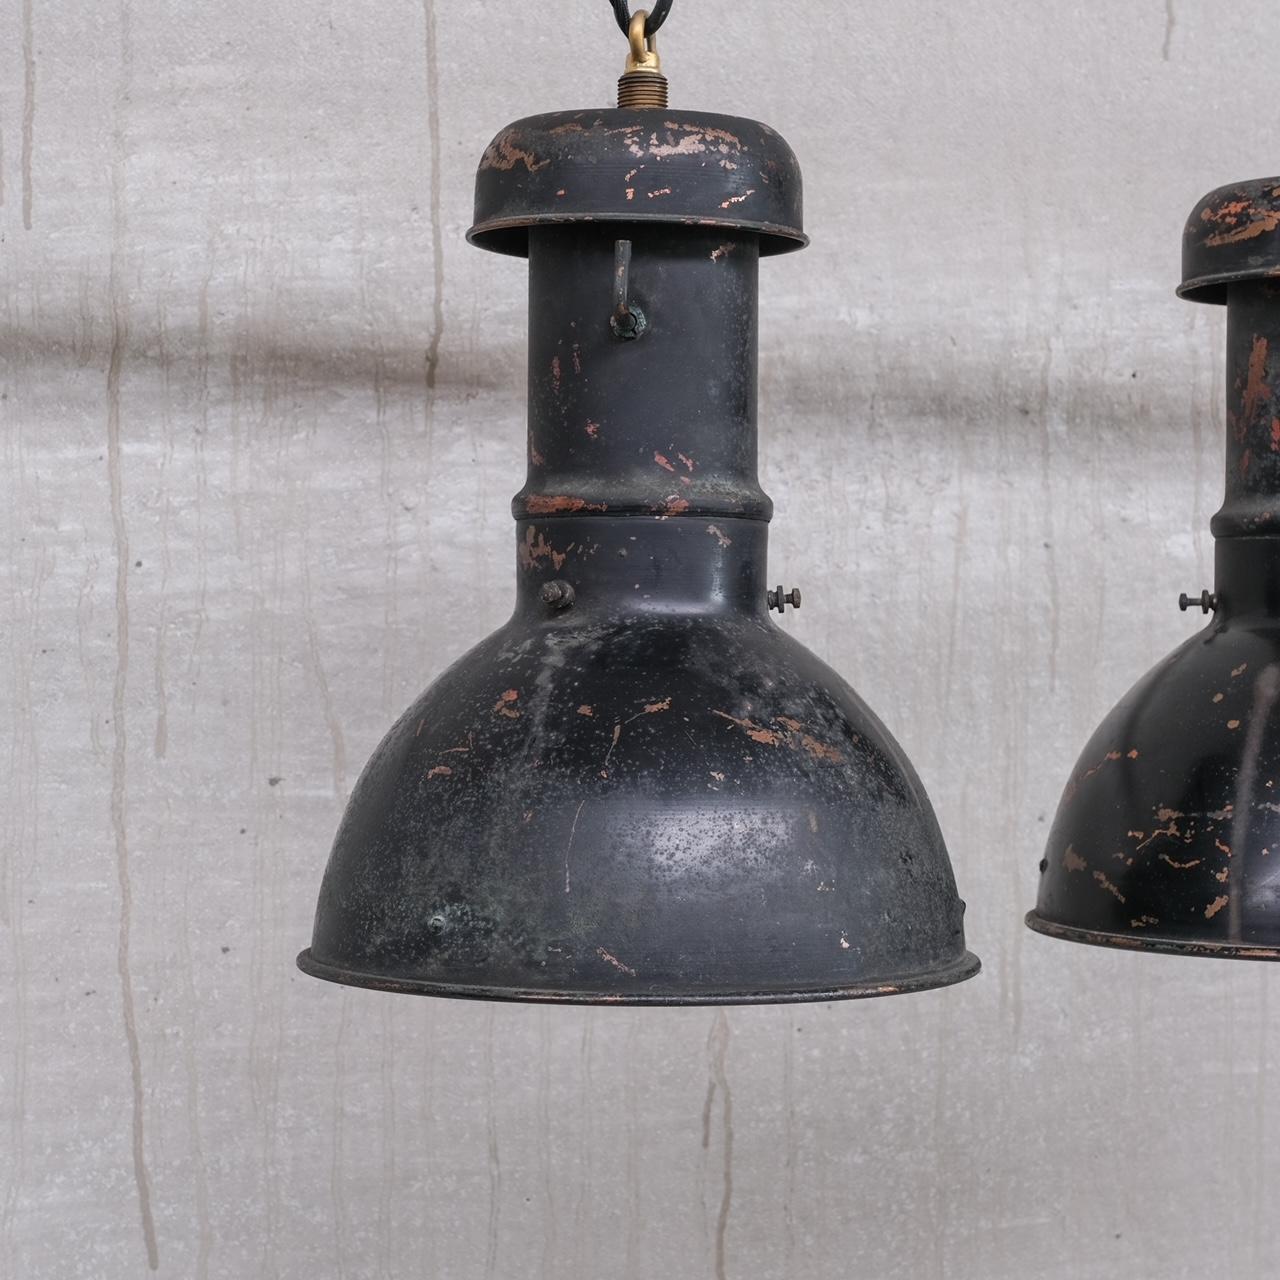 A pair of copper pendant lights.

Mercury glass mirrored internal shades.

France, circa 1920s.

Price is for the pair.

Re-wired and PAT tested.

Good condition, some scuffs and wear commensurate with age. They could be sprayed again on